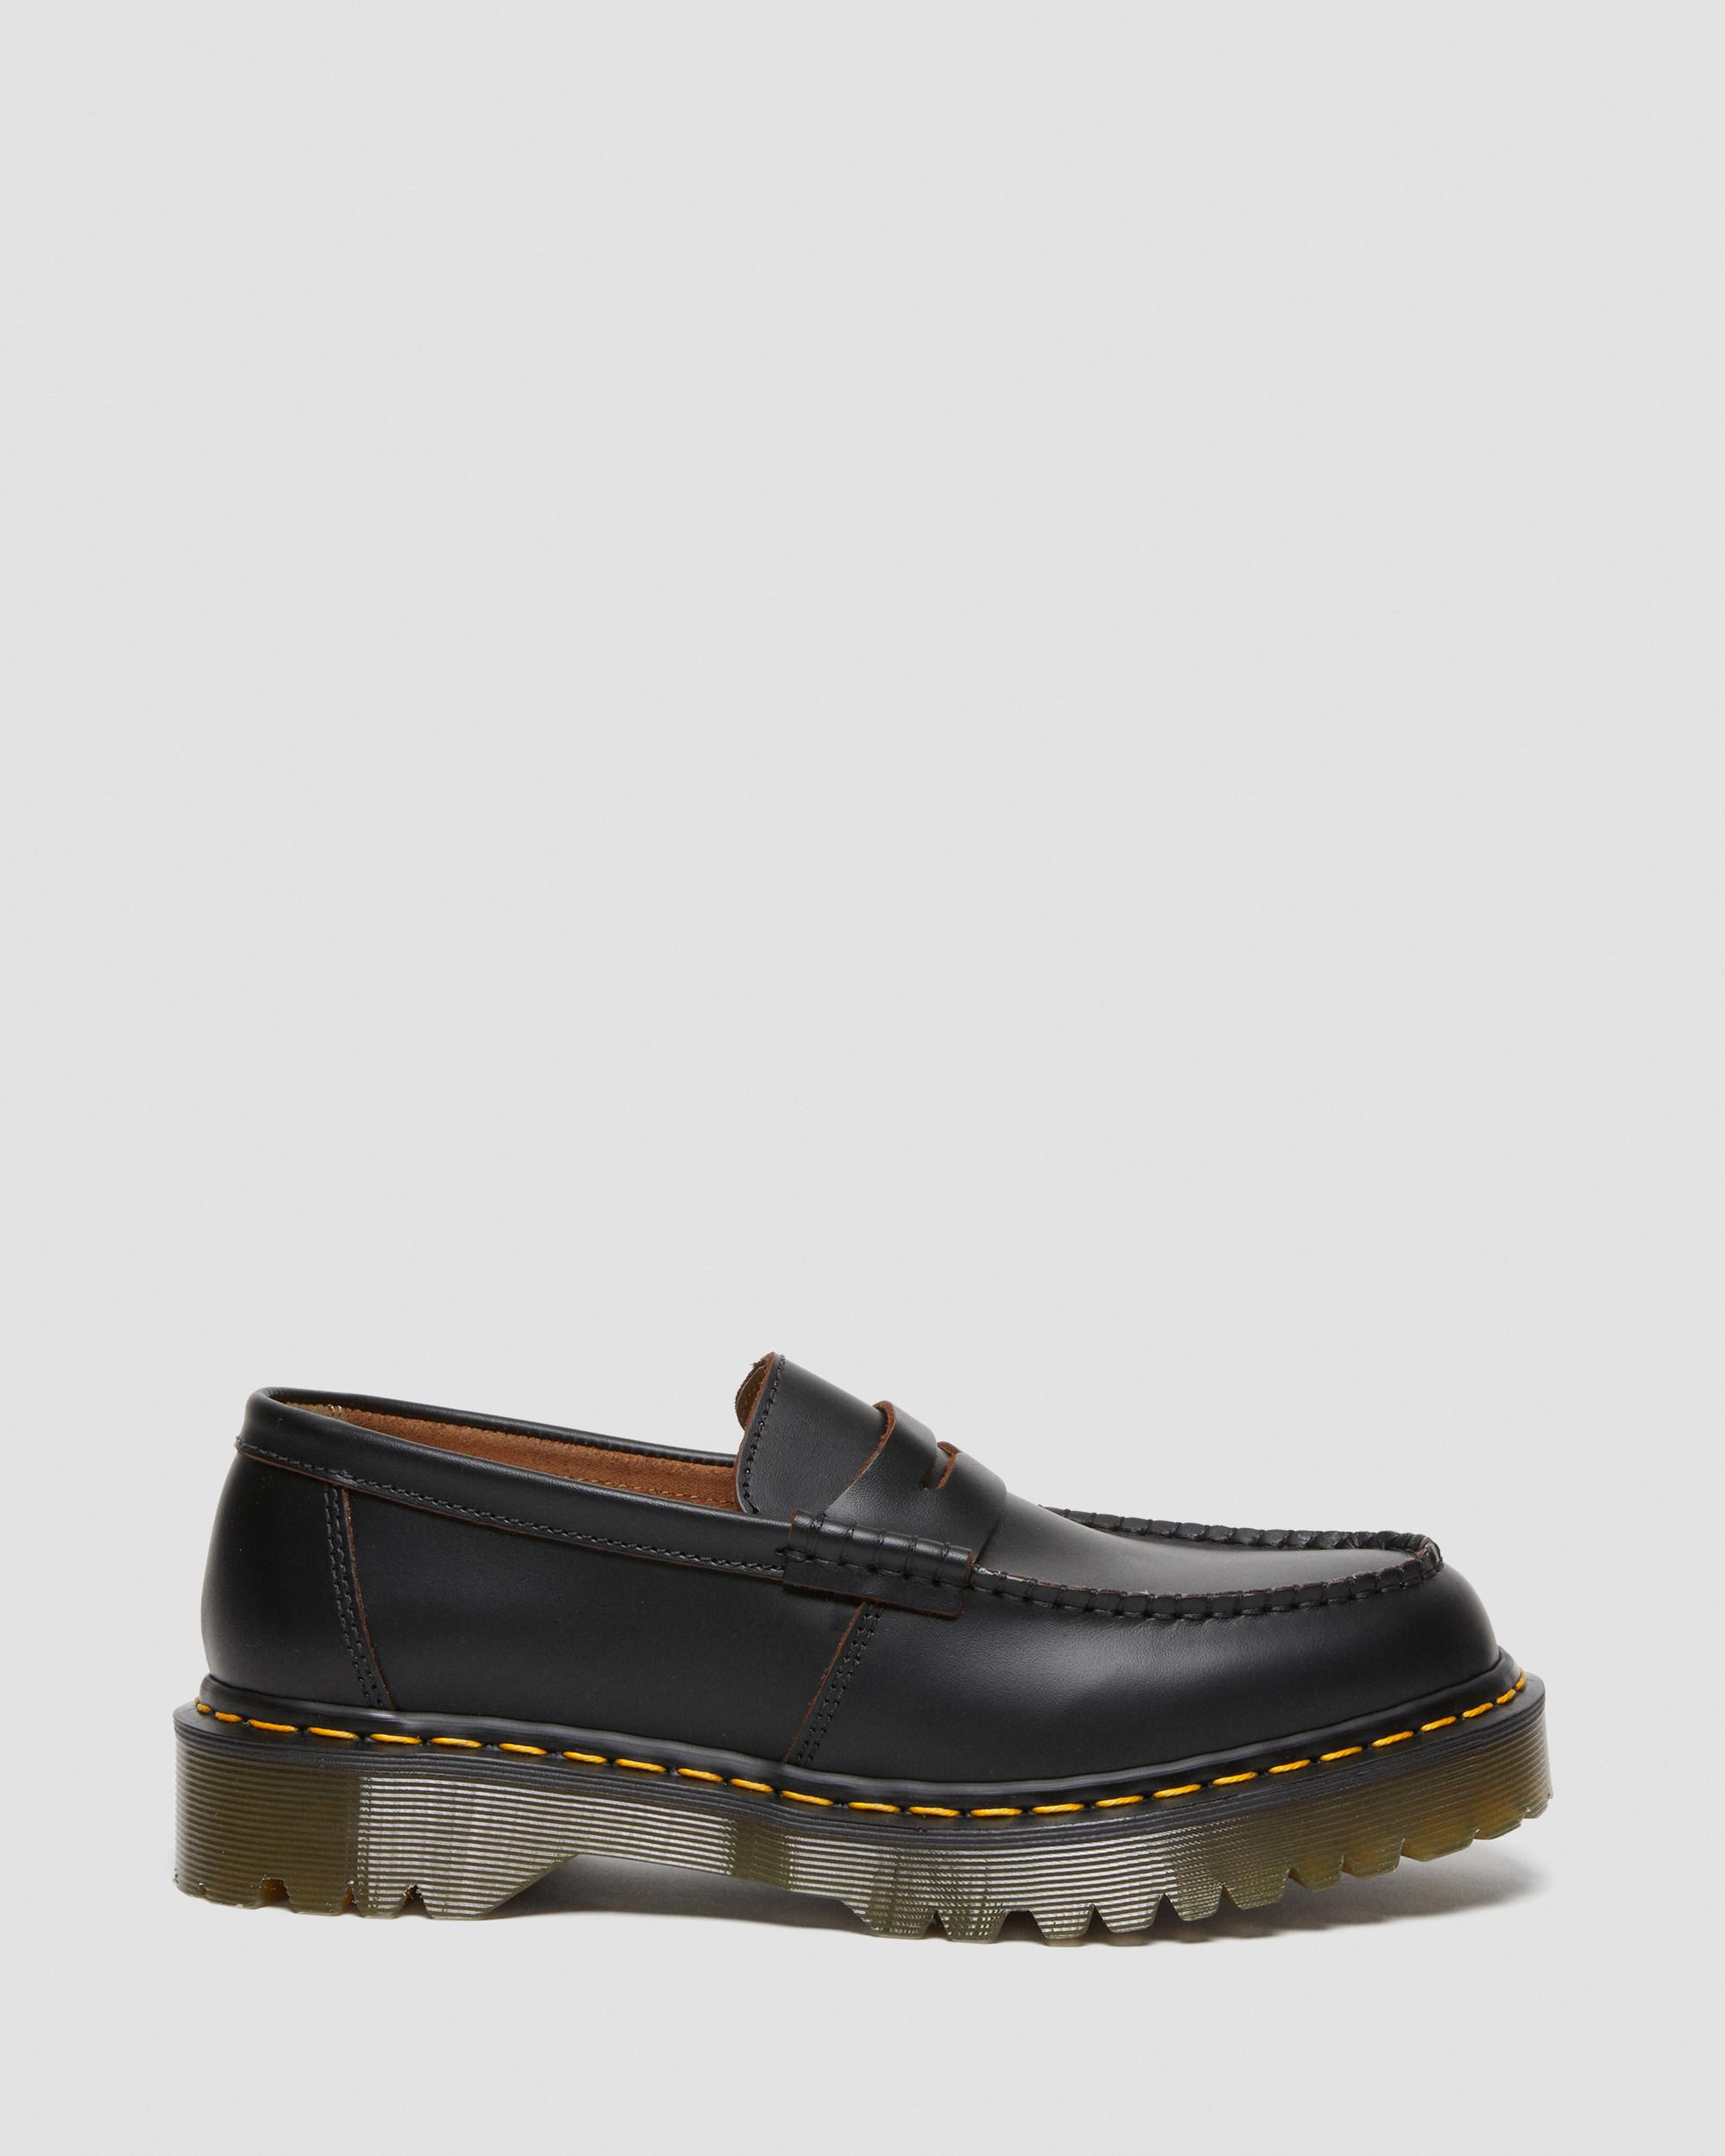 DR MARTENS Penton Bex Leather Loafers